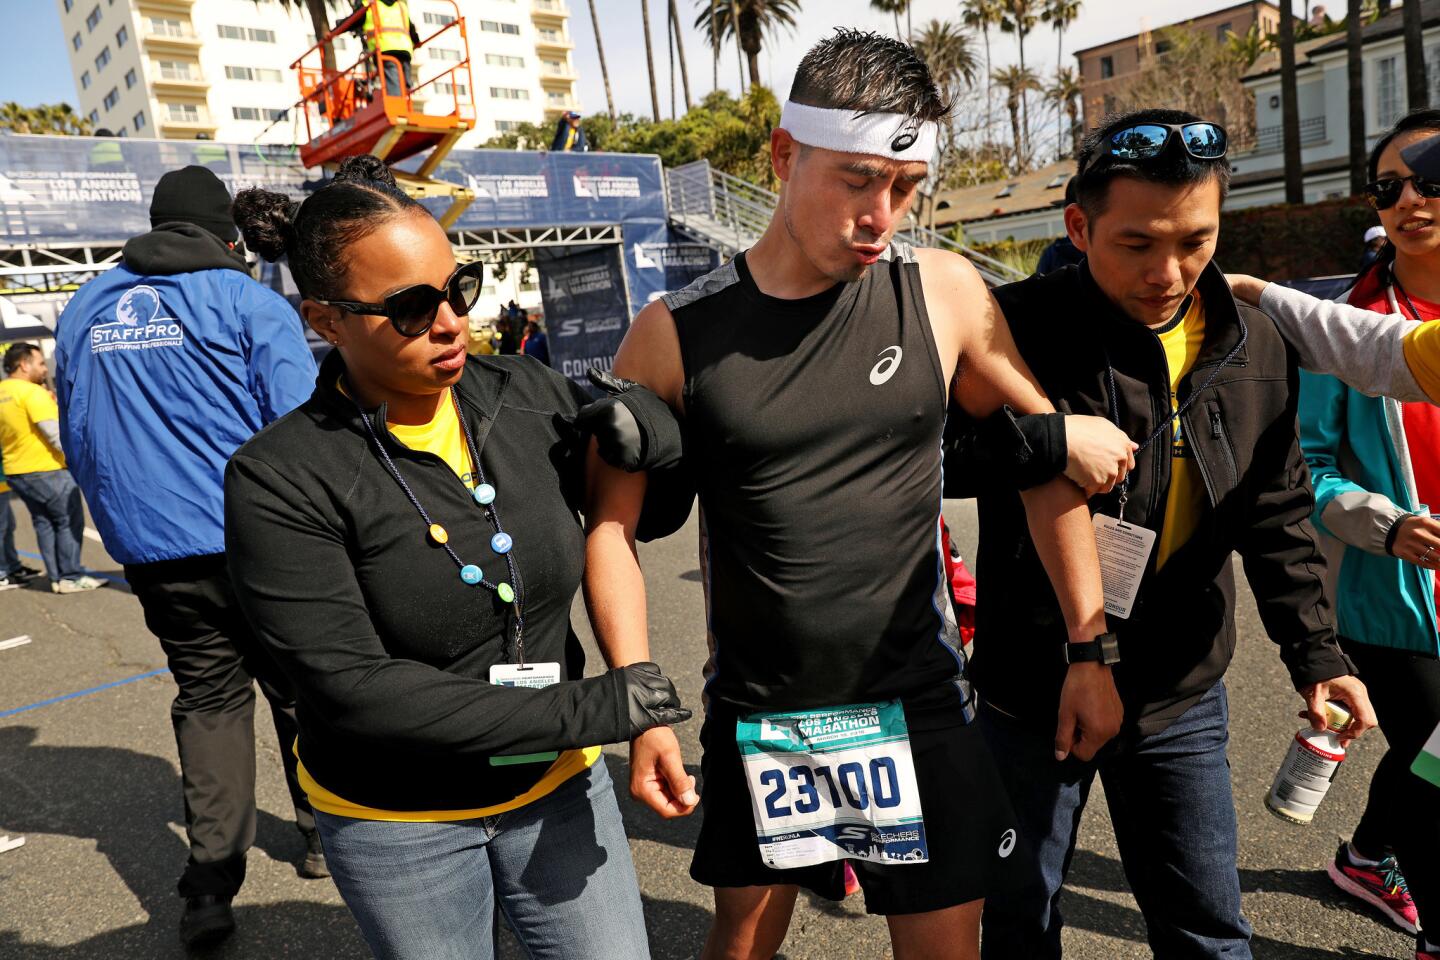 Race participant Jose Bustamante, center, is assisted by volunteers after finishing the L.A. Marathon on Sunday.